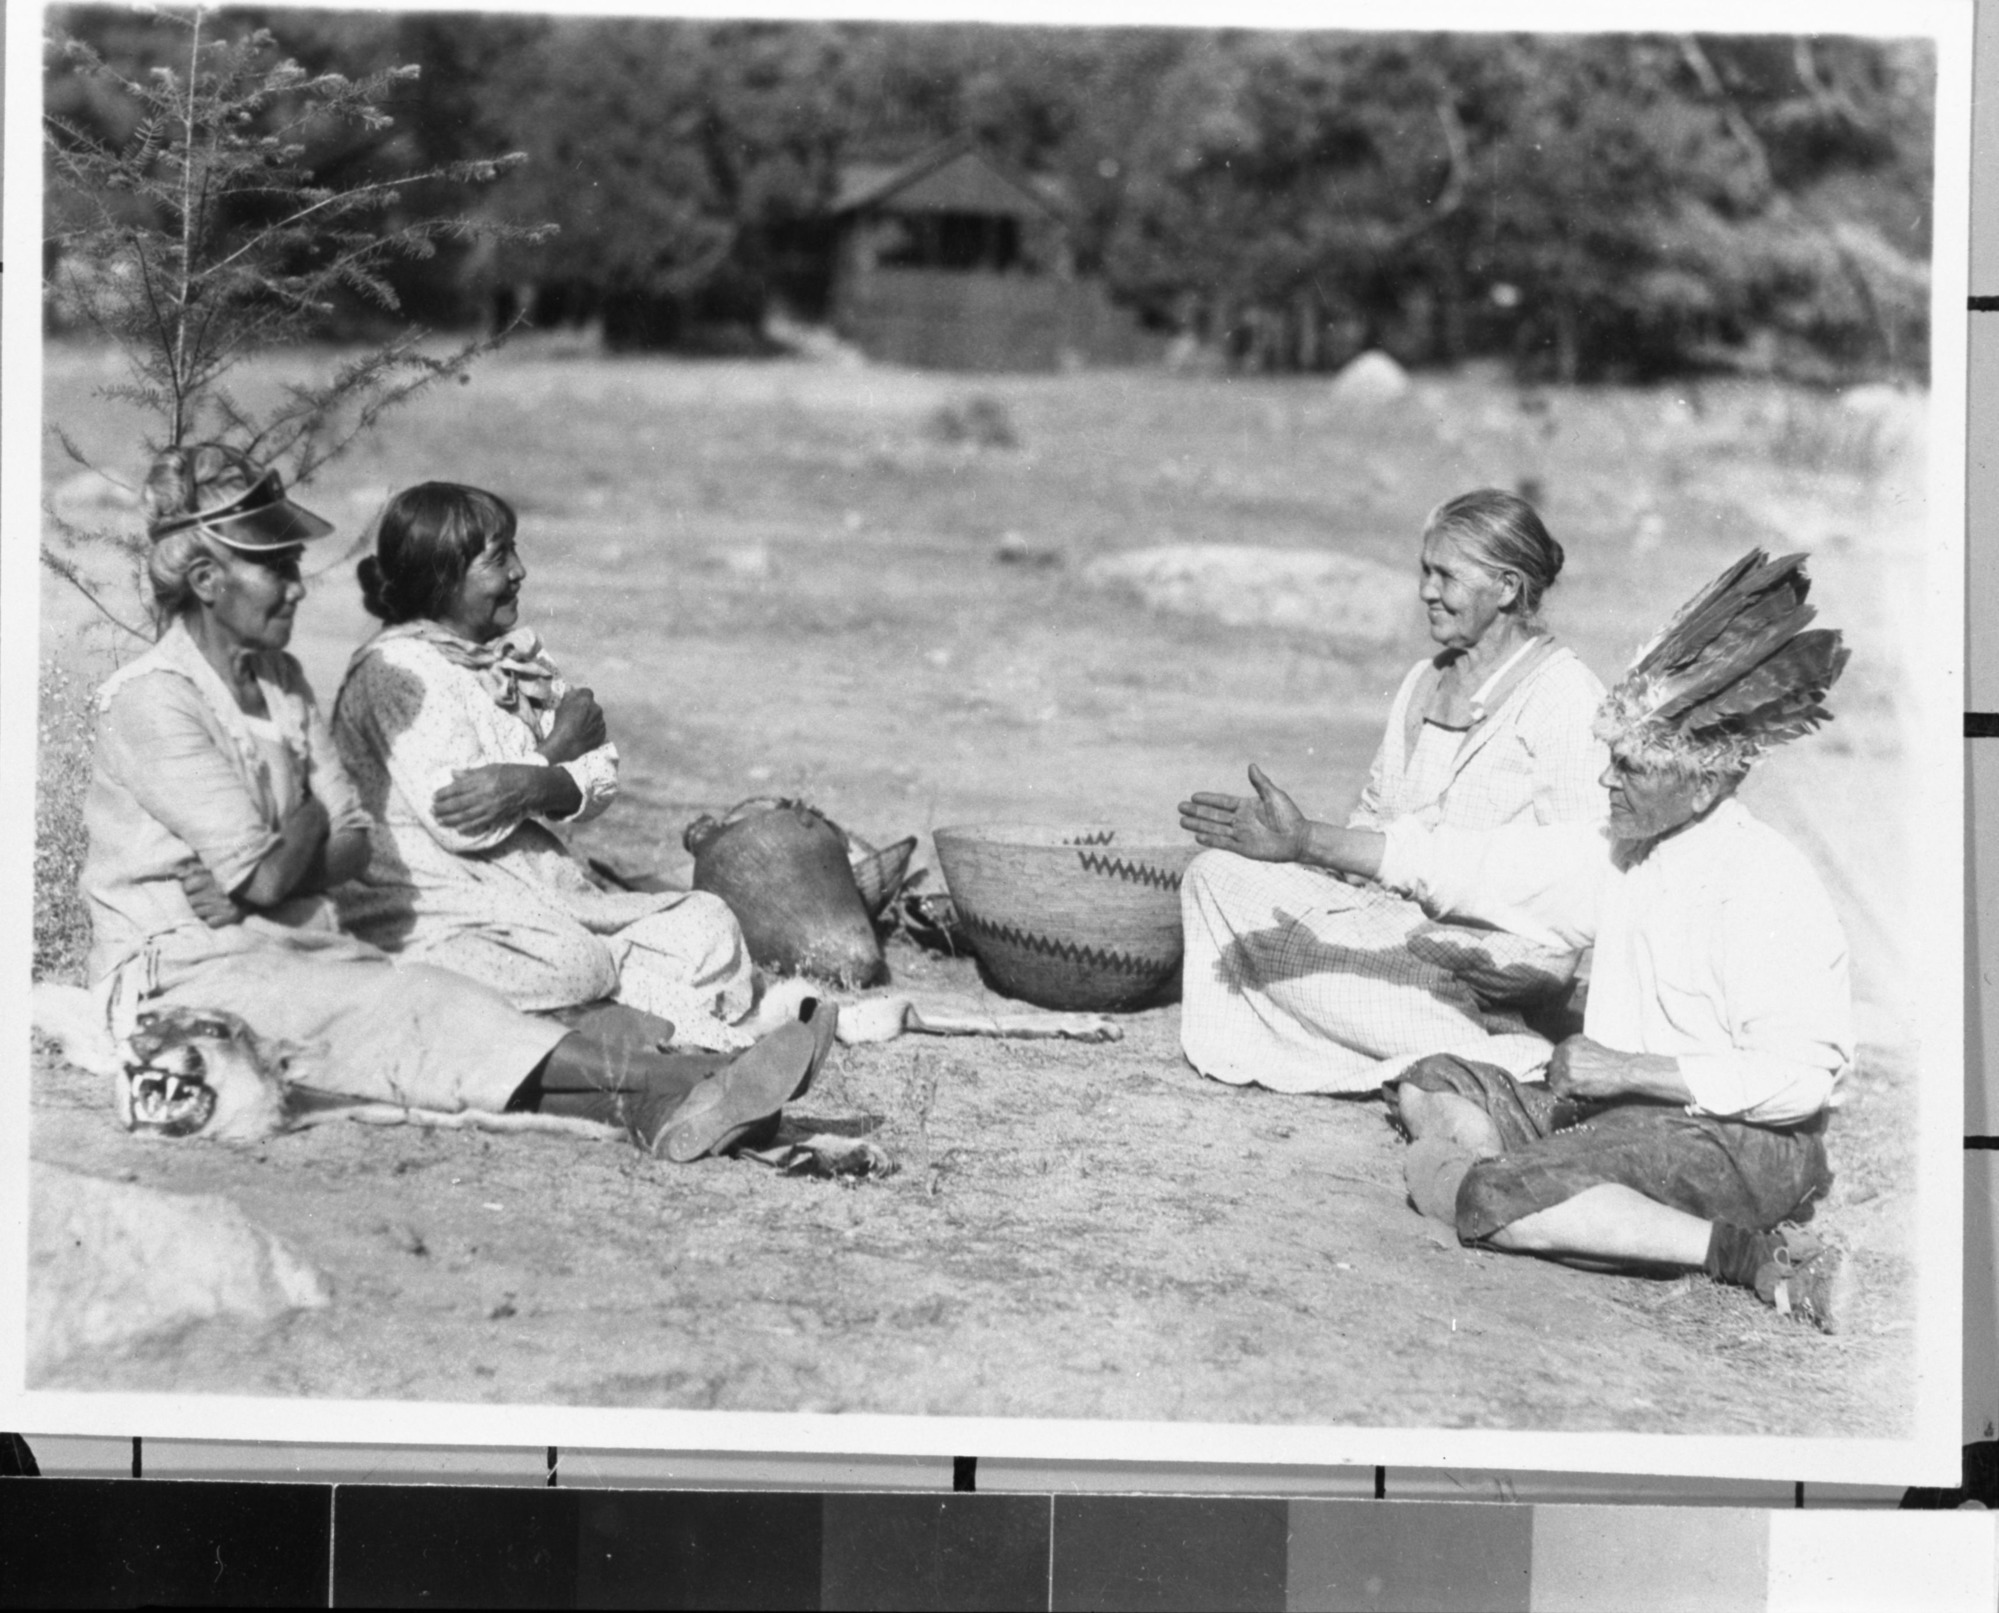 Native American hand game. L to R: Sally Ann, Maggie Howard, "Grandma", and Bill Dad. Bill Dad calls "put-ka". The mountain lionskin and baskets are from the YNP collections.